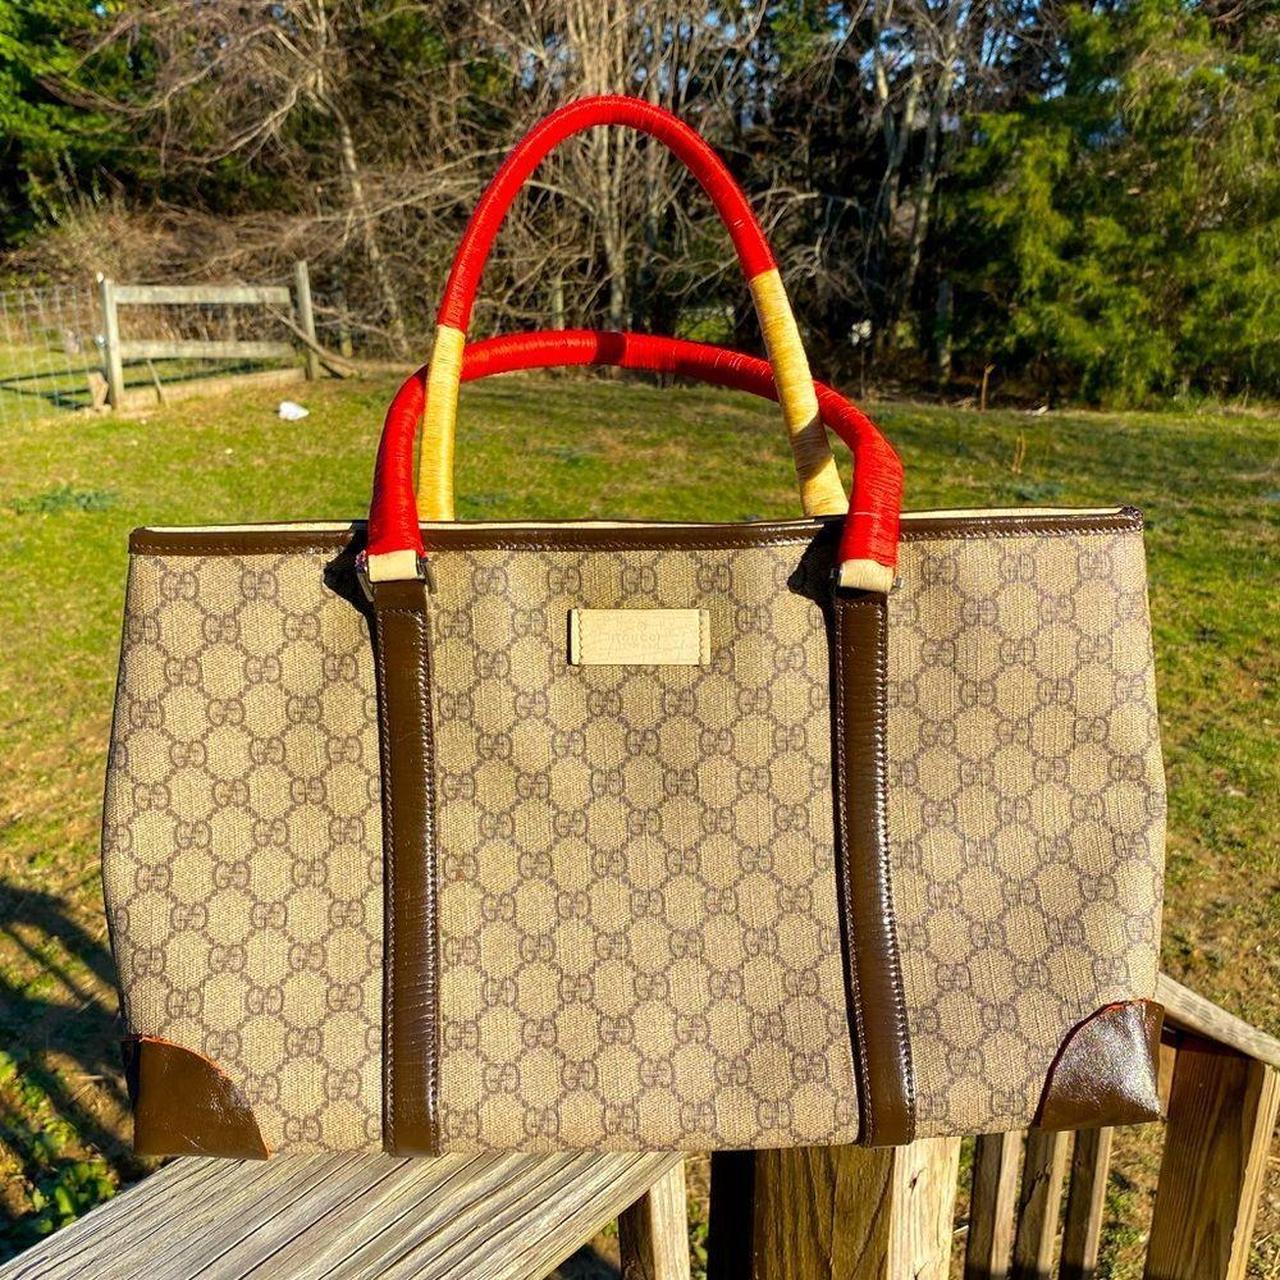 Gucci Women's Tan and Red Bag